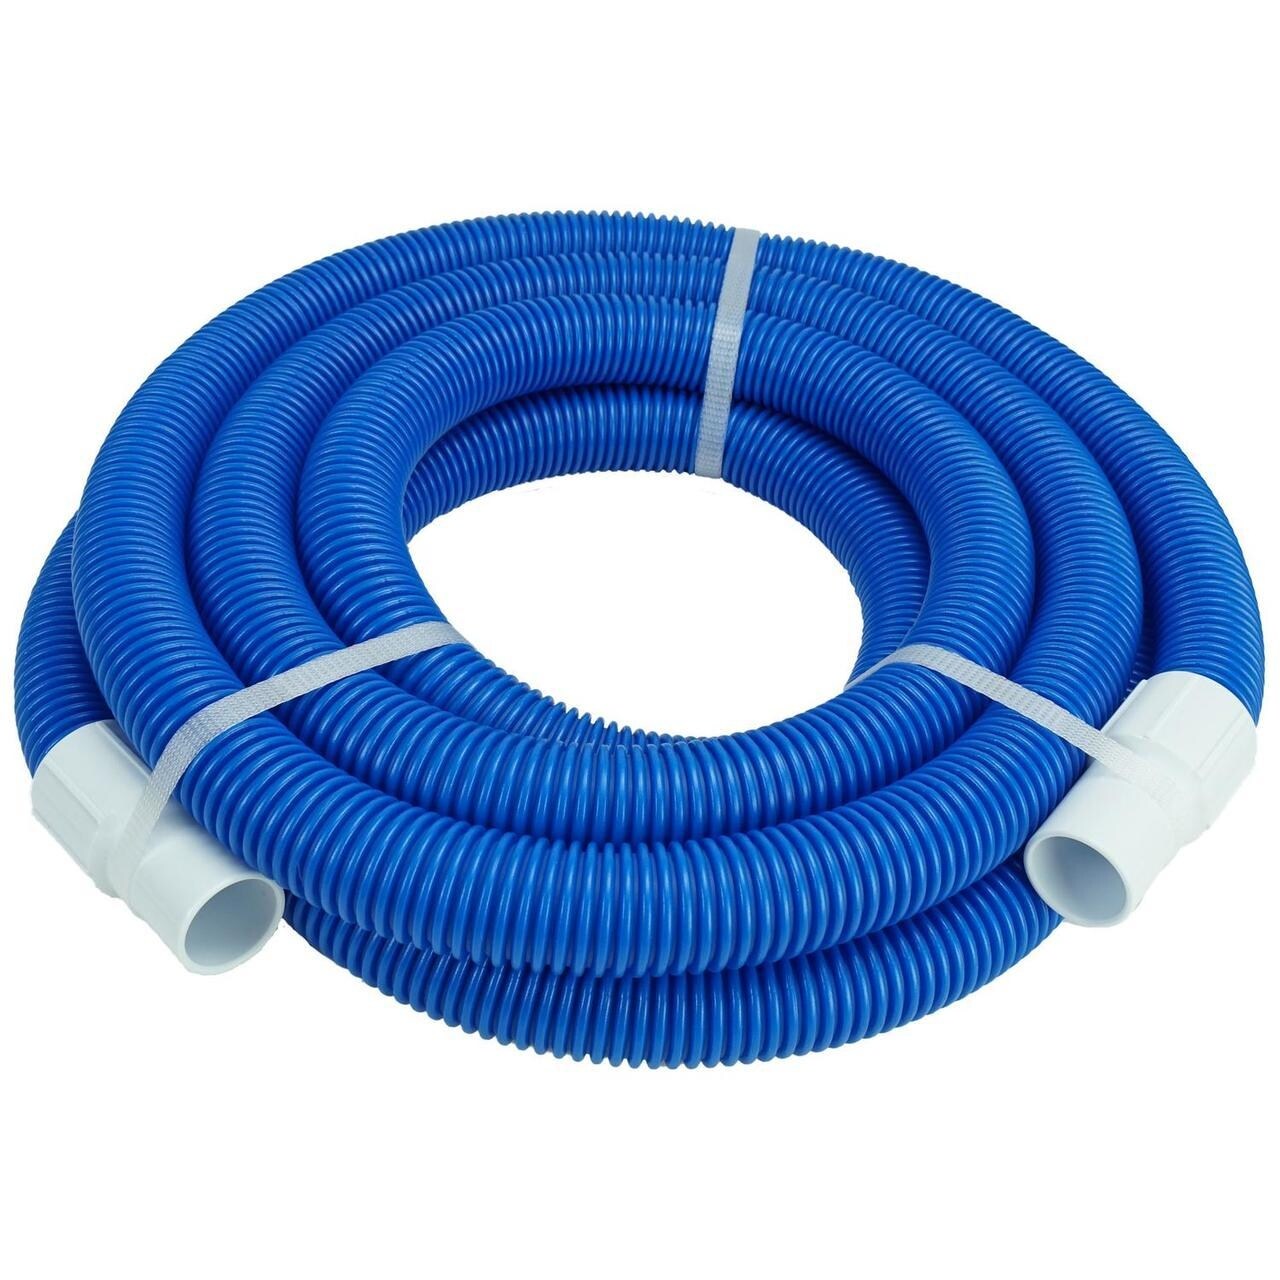 Shop Blue Blow Molded Pe Swimming Pool Vacuum Hose With White